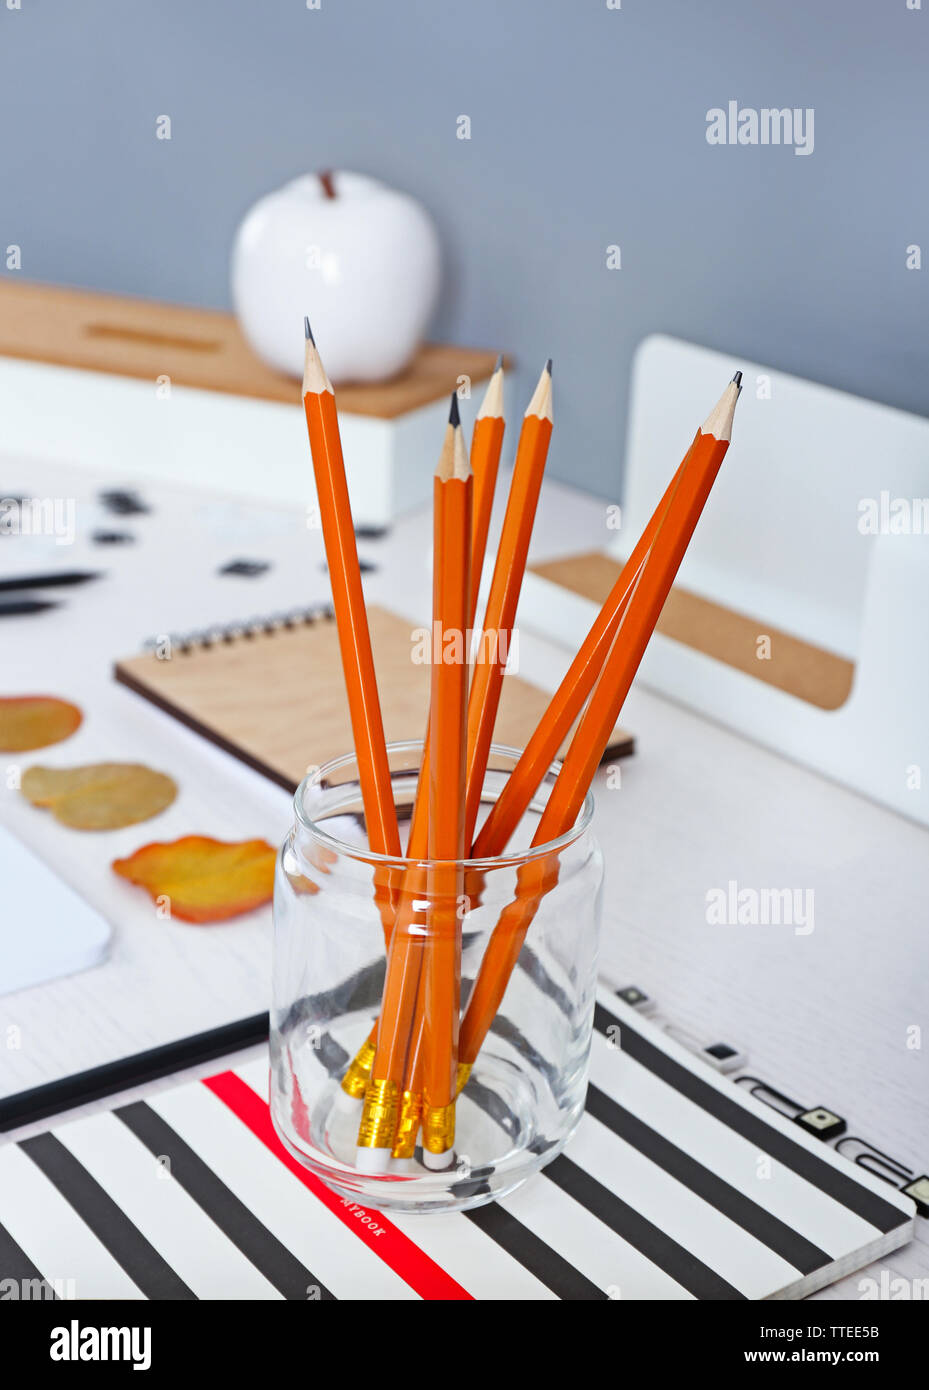 Set Of Pencils In Glass Jar On A Table Stock Photo 256015351 Alamy